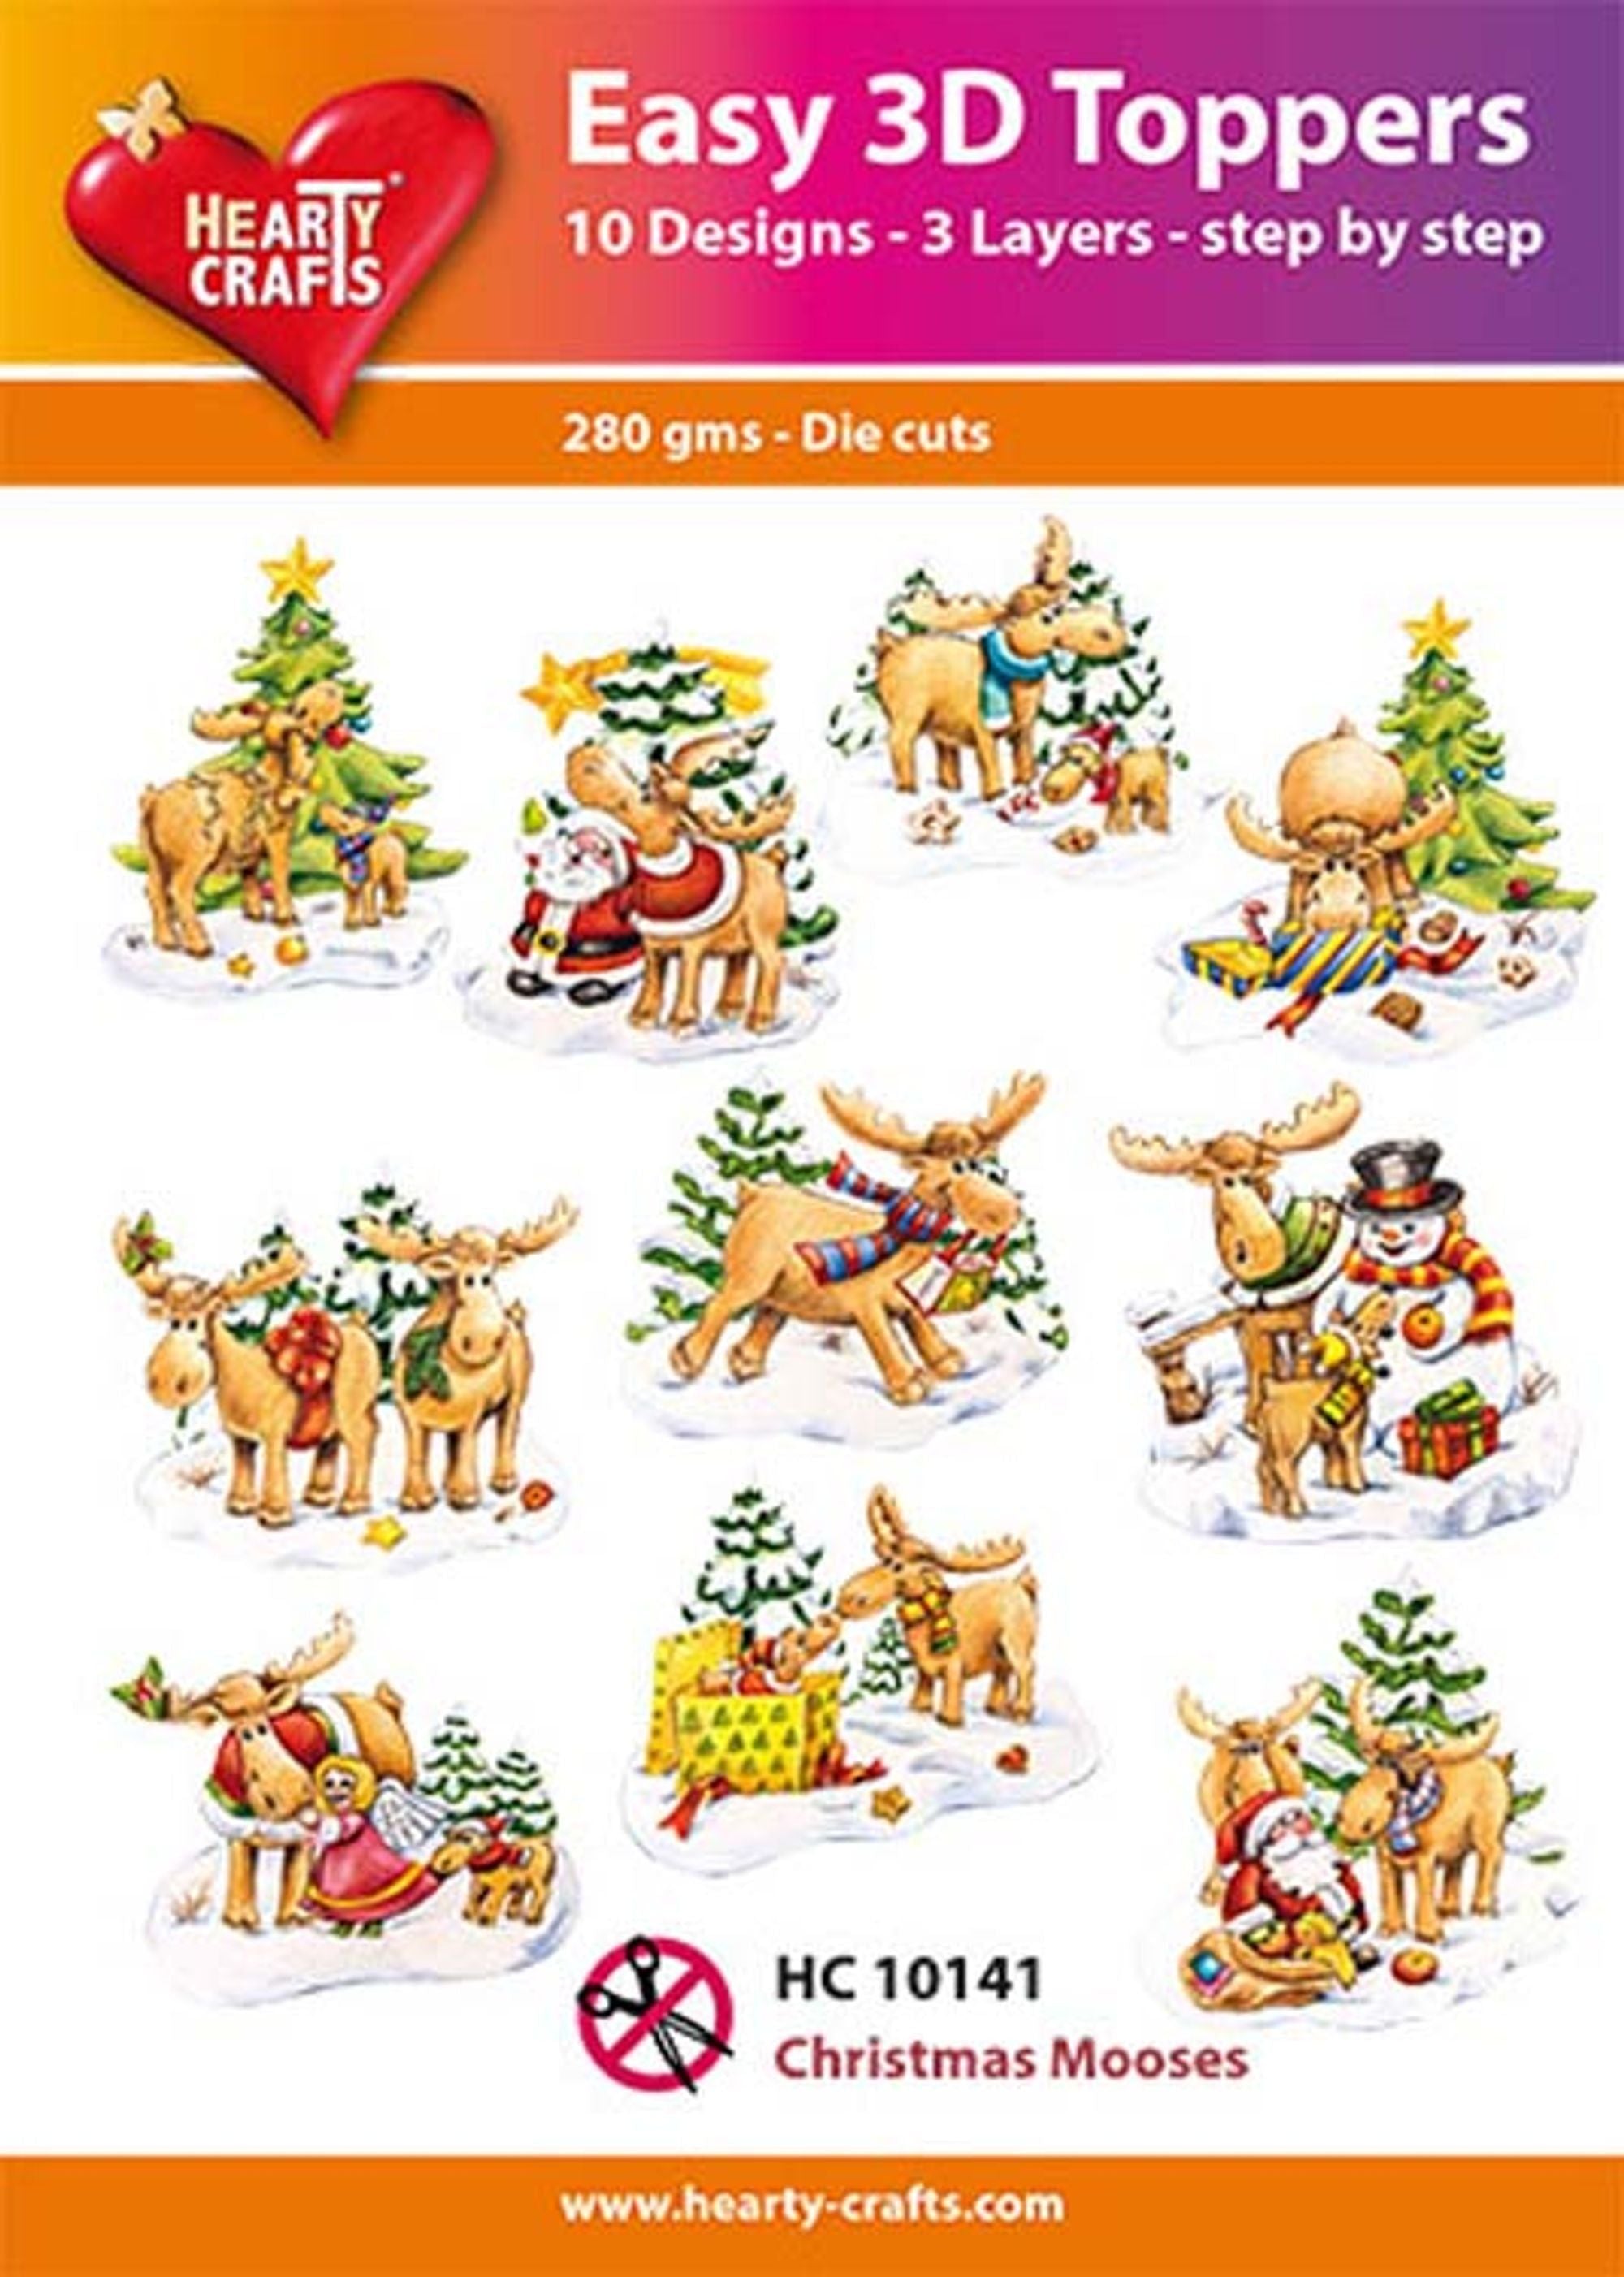 Hearty Crafts Easy 3D Toppers Christmas Mooses